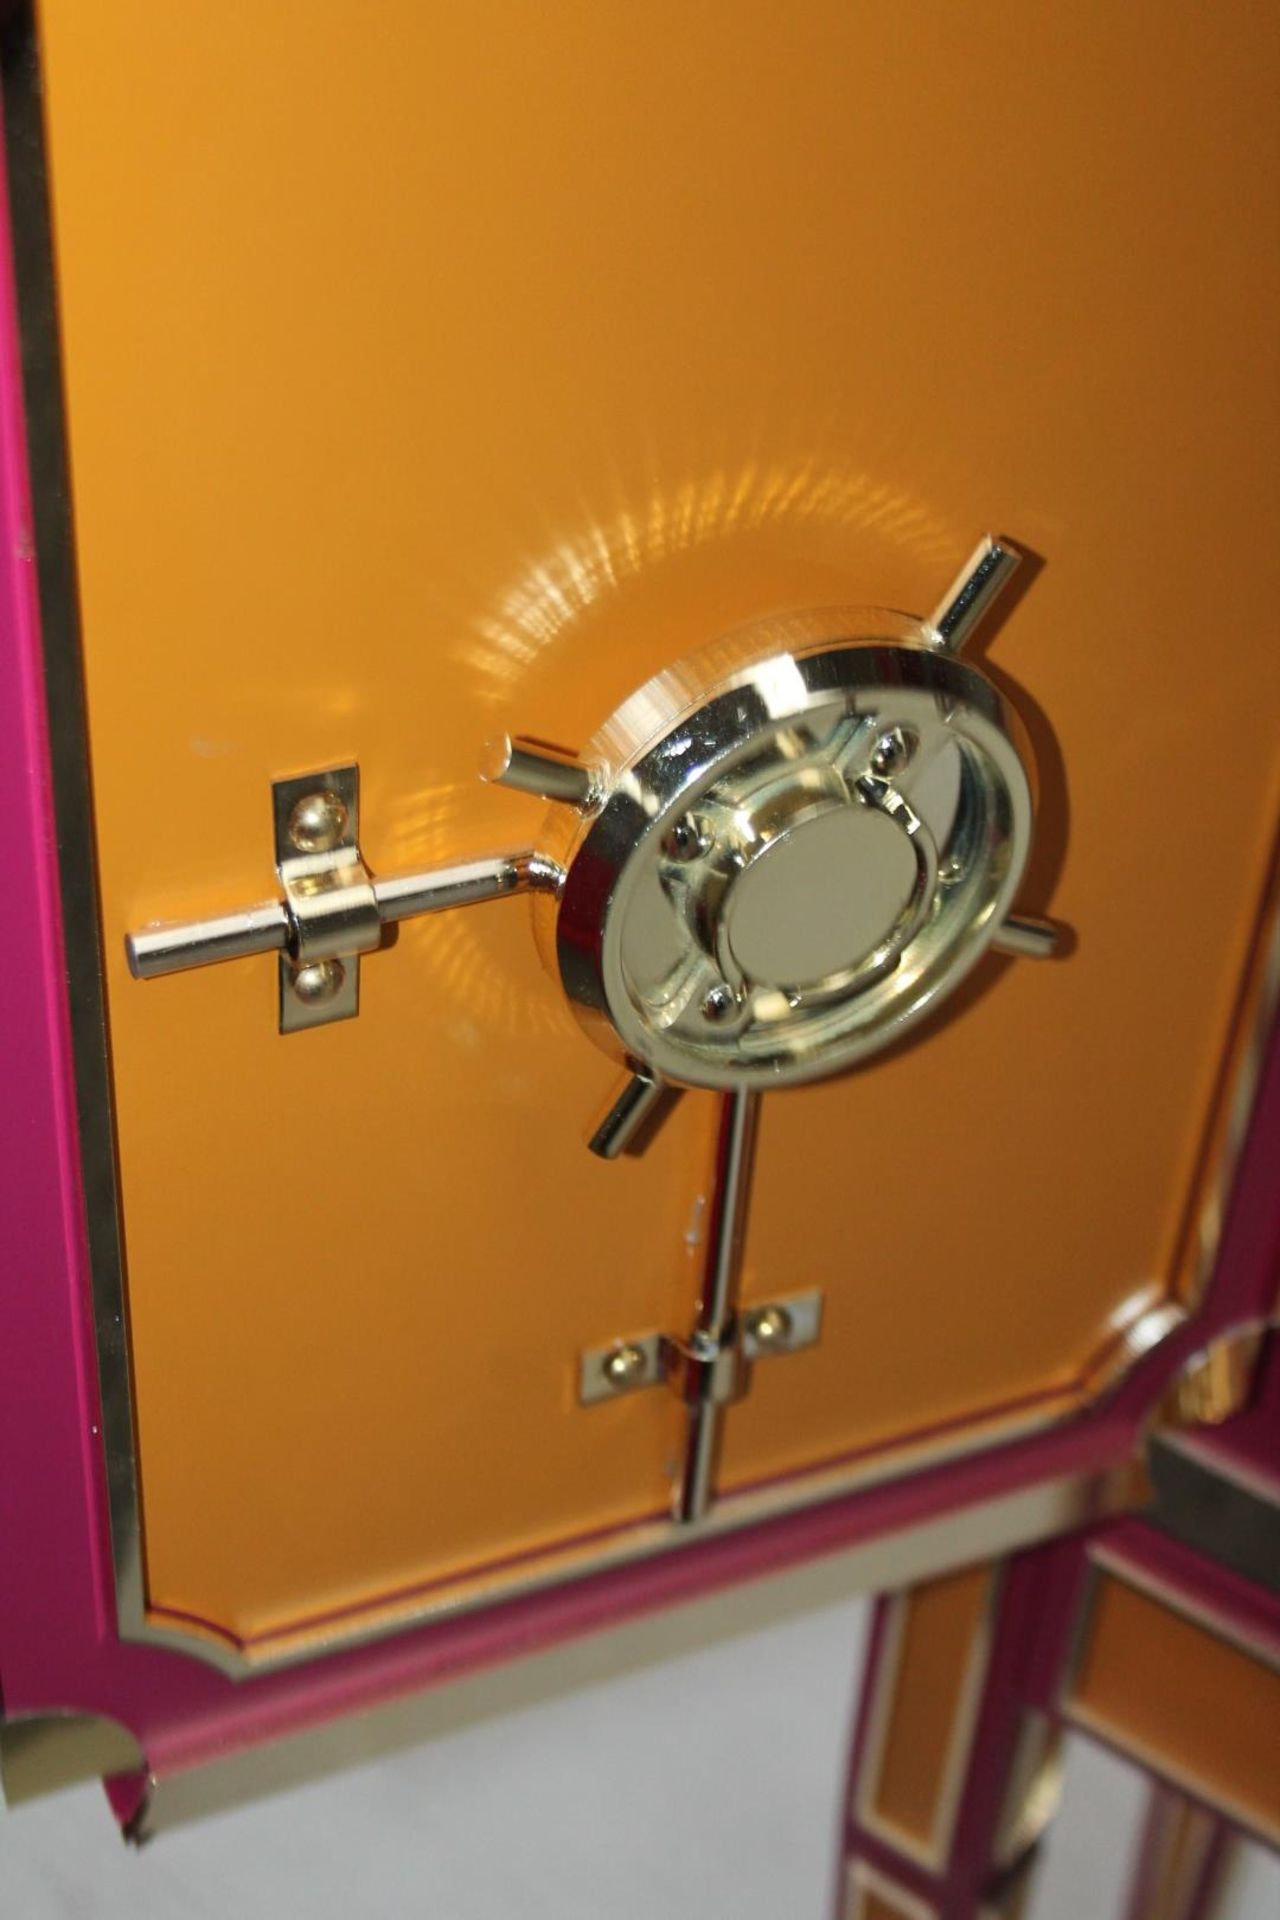 2 x Specially Commissioned Bank Vault Safe-style Illuminated Shop Display Dummy Props - Image 13 of 17